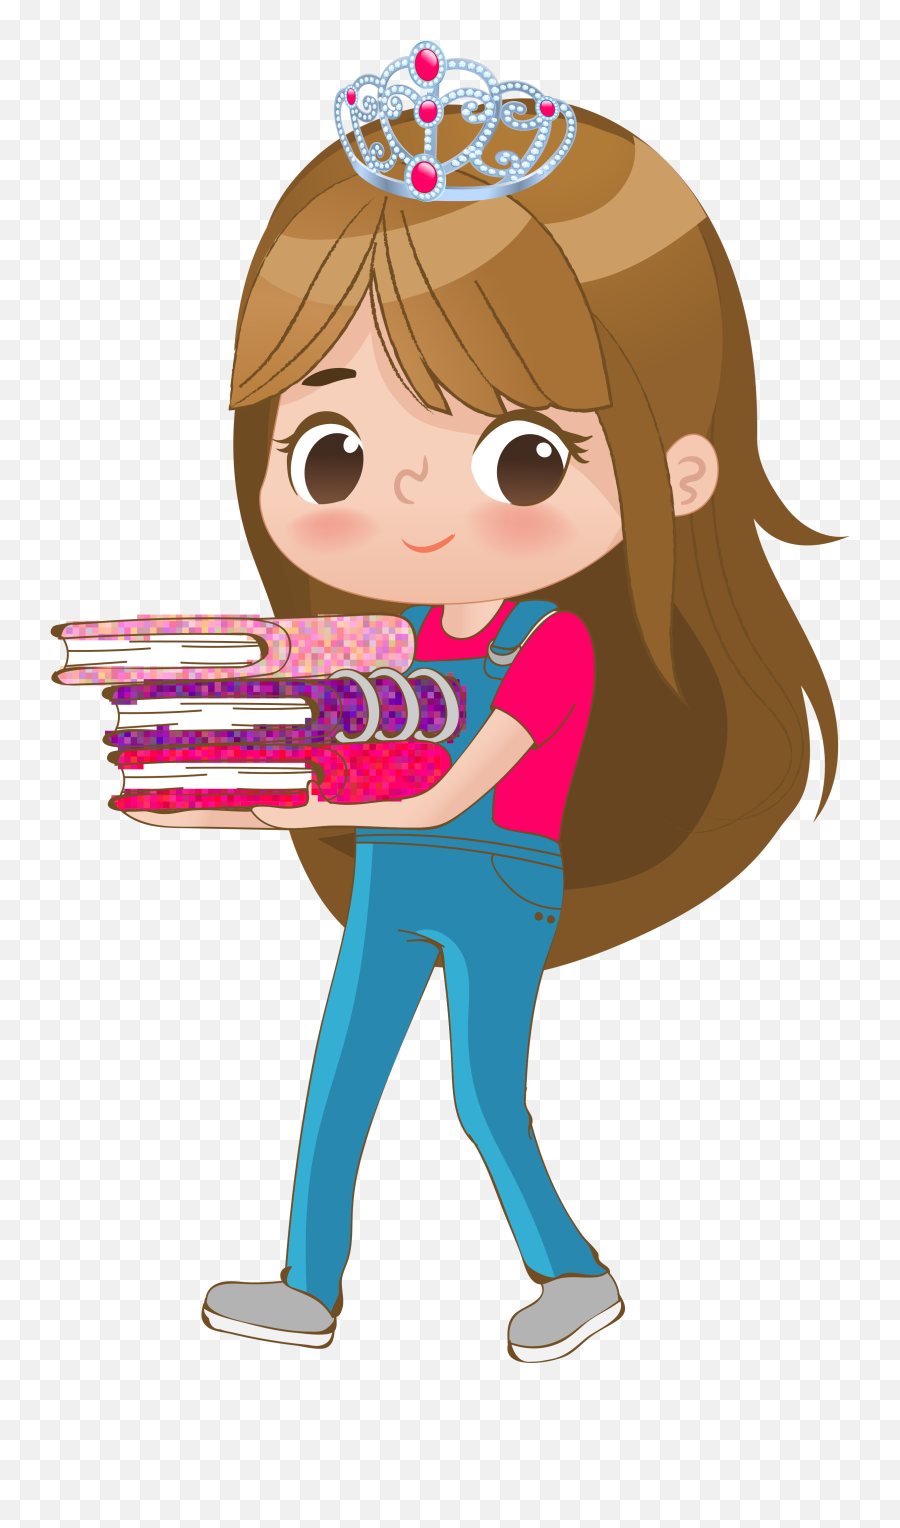 February 2020 Journal Prompt And Self - Reflection Flipbook Small Brown Hair Girl Emoji,Preoccupied Emotions Clip Art